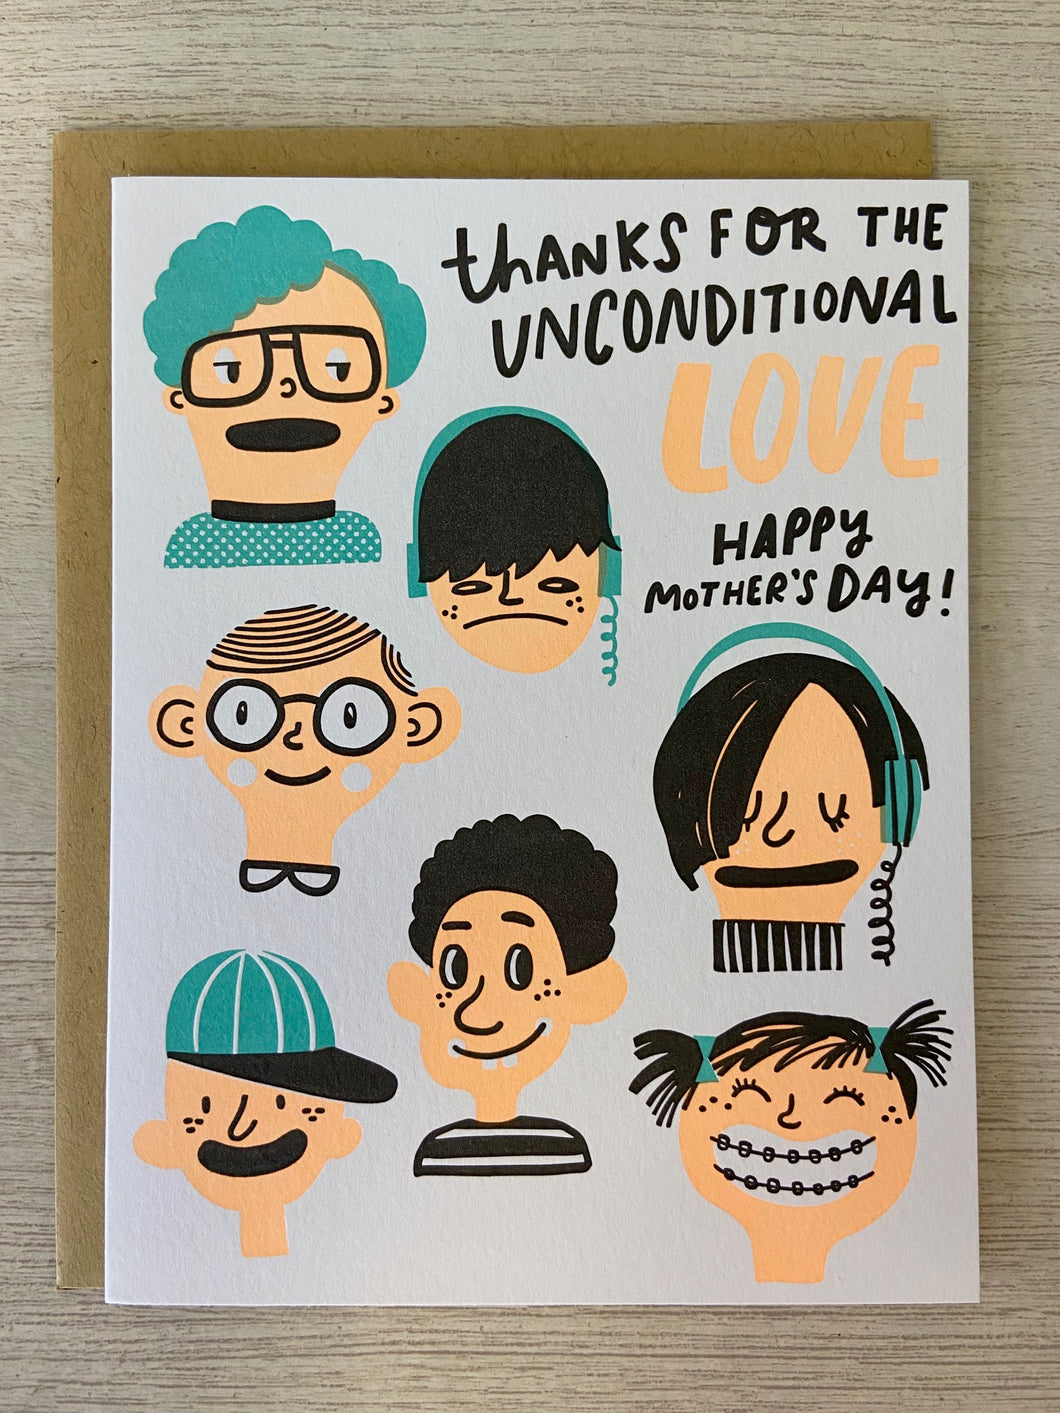 Unconditional Love Mother's Day Greeting Card - Indie Indie Bang! Bang!